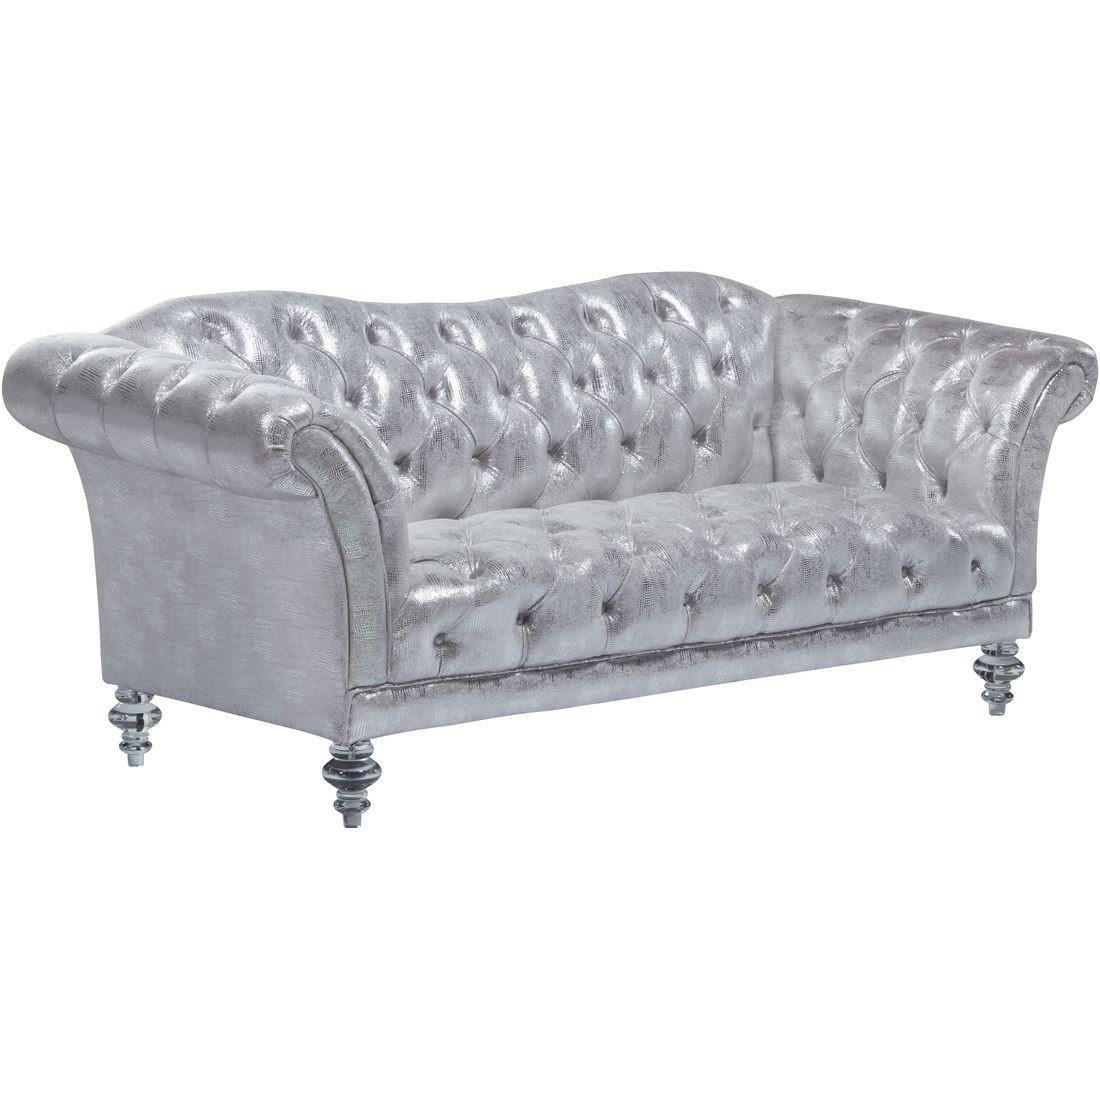 Classic,  Vintage Loveseat Dixie 52781 in Silver Fabric